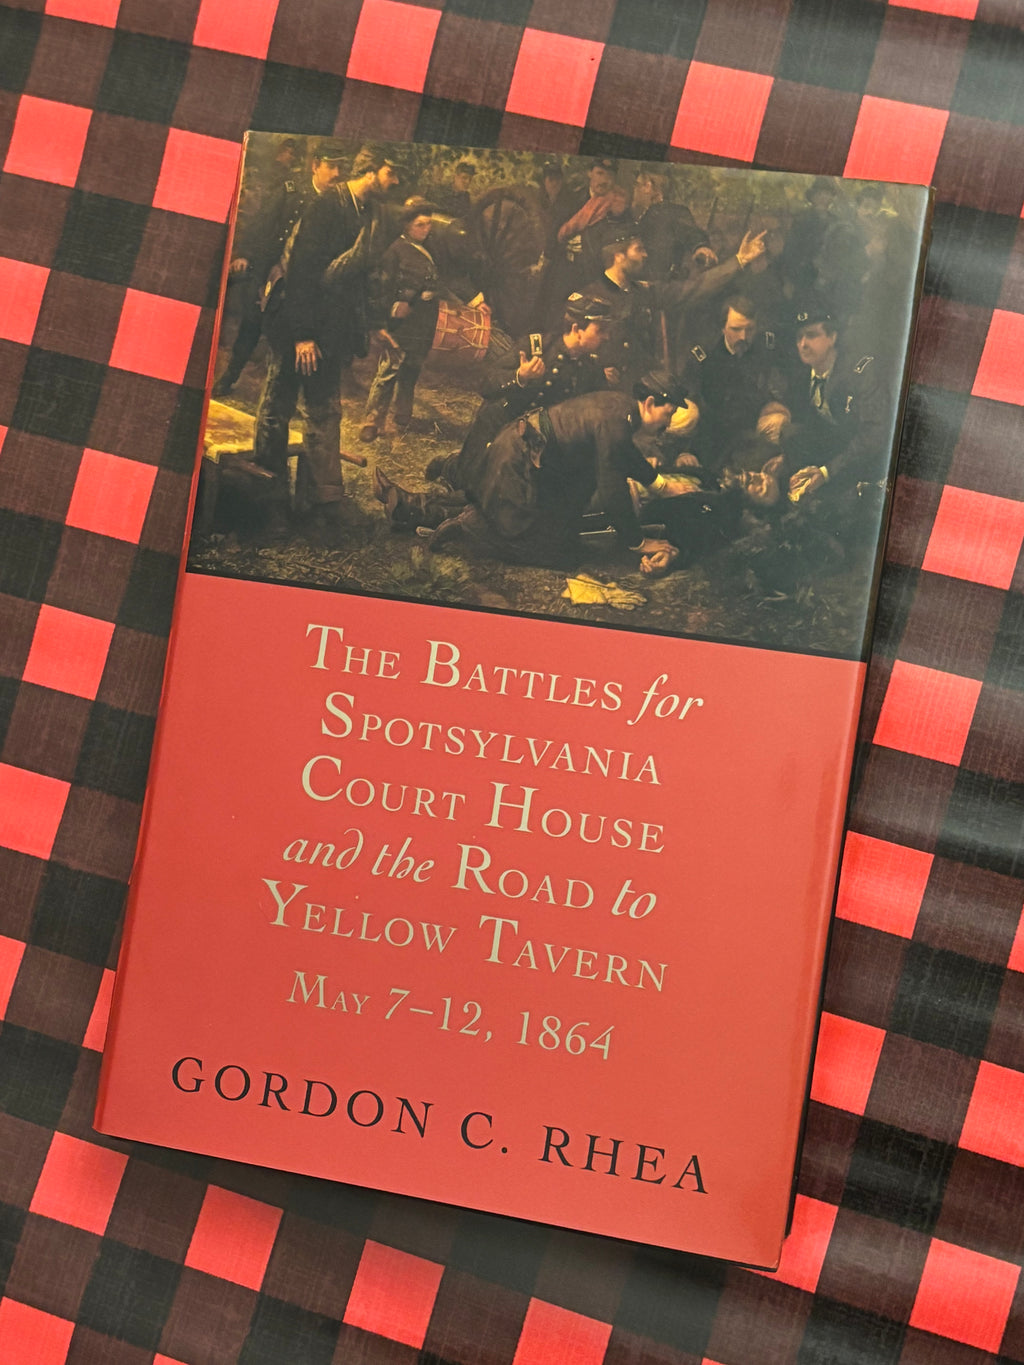 The Battles for Spotsylvania Court House and the Road to Yellow Tavern May 7-12, 1864- By Gordon C. Rhea